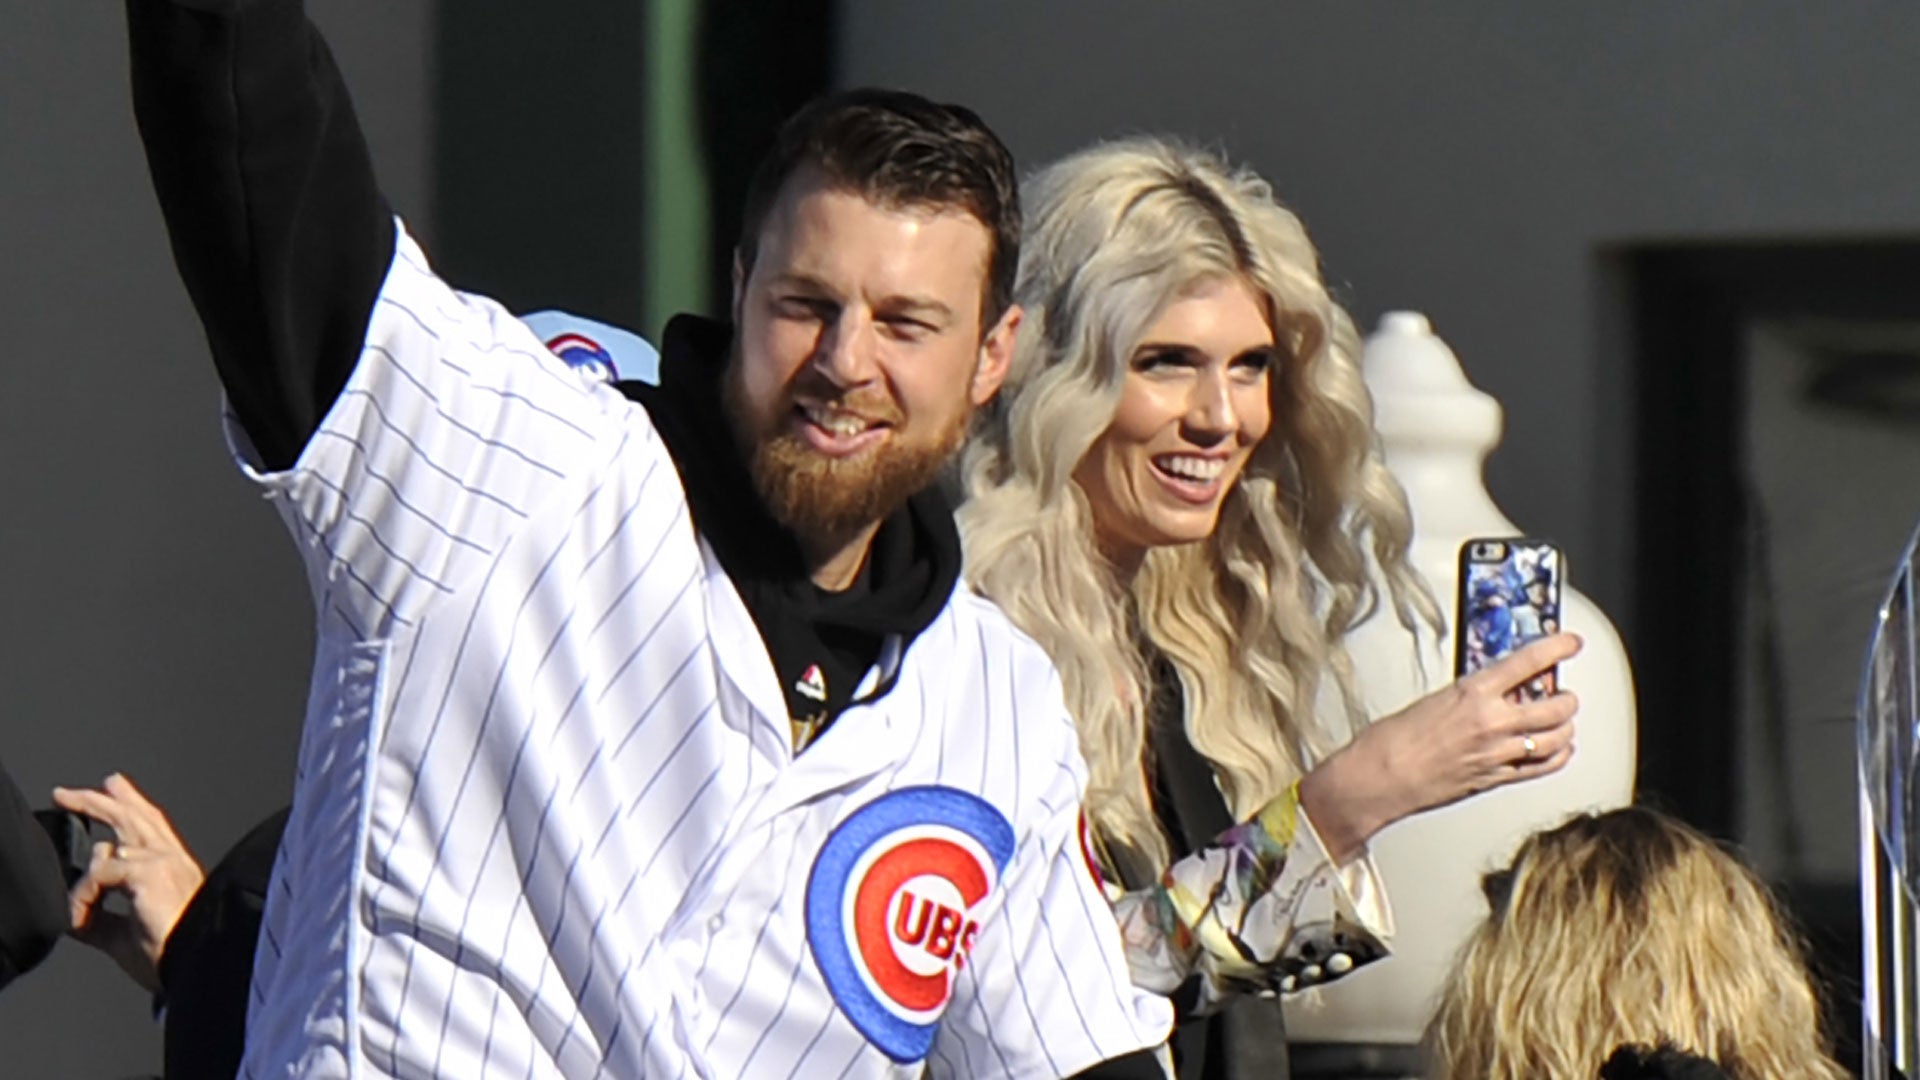 Stunned Fans Pray for 'All-American' Christian Family: Chicago Cubs' Ben  Zobrist and Wife Julianna File for Divorce